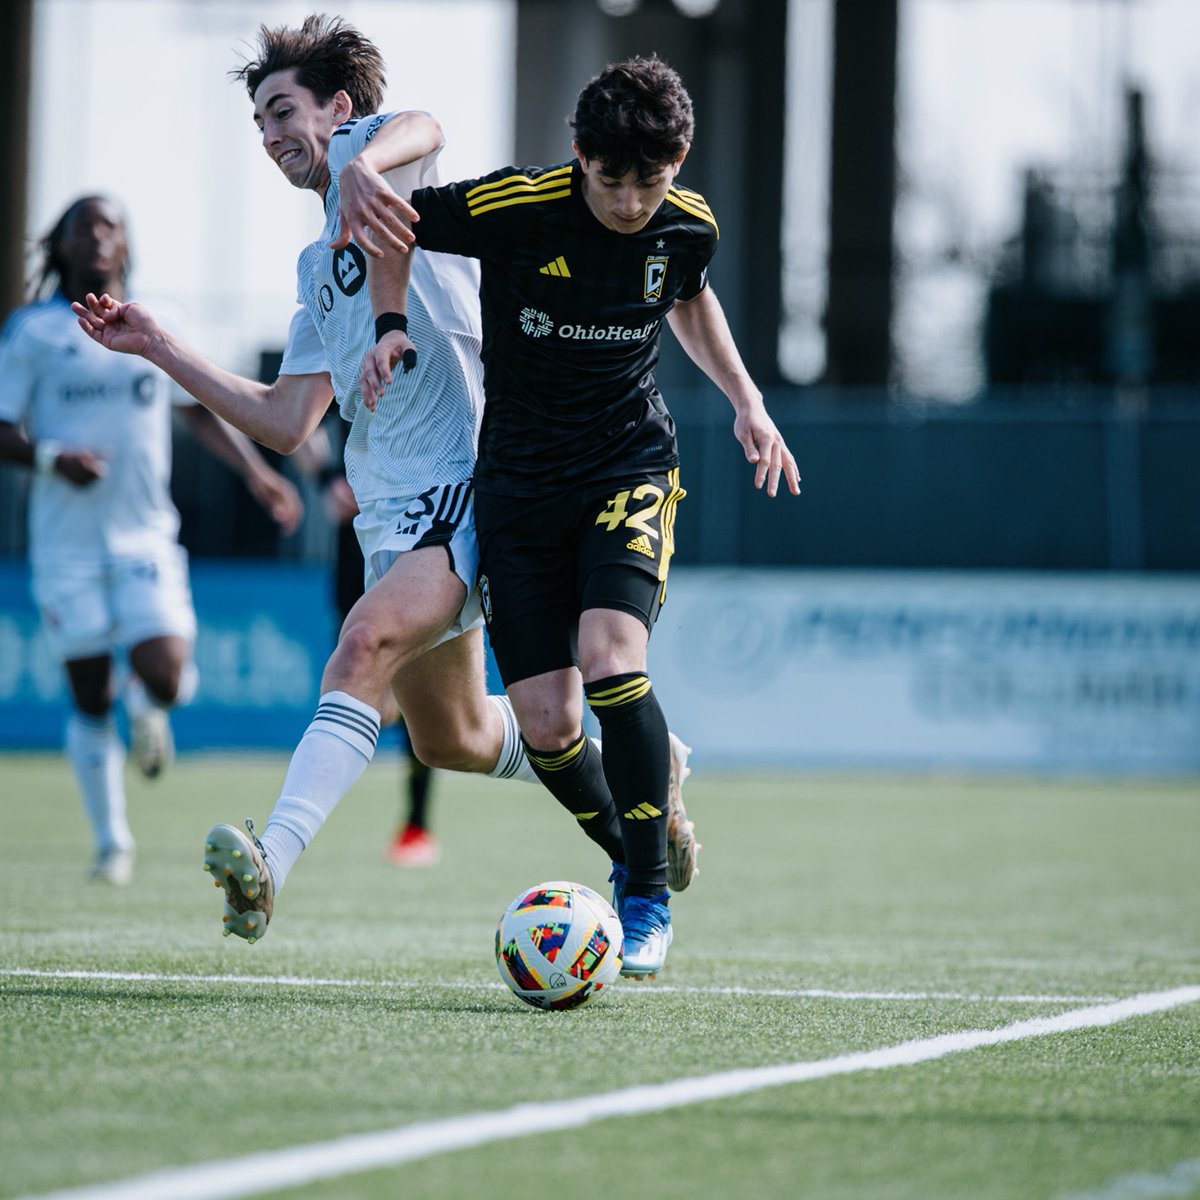 His first, but certainly not his last 👏 Congratulations to @CrewAcademy96’s Joshua Veycheck for making his first start with Crew 2 over the weekend! #Crew96 | #VamosColumbus